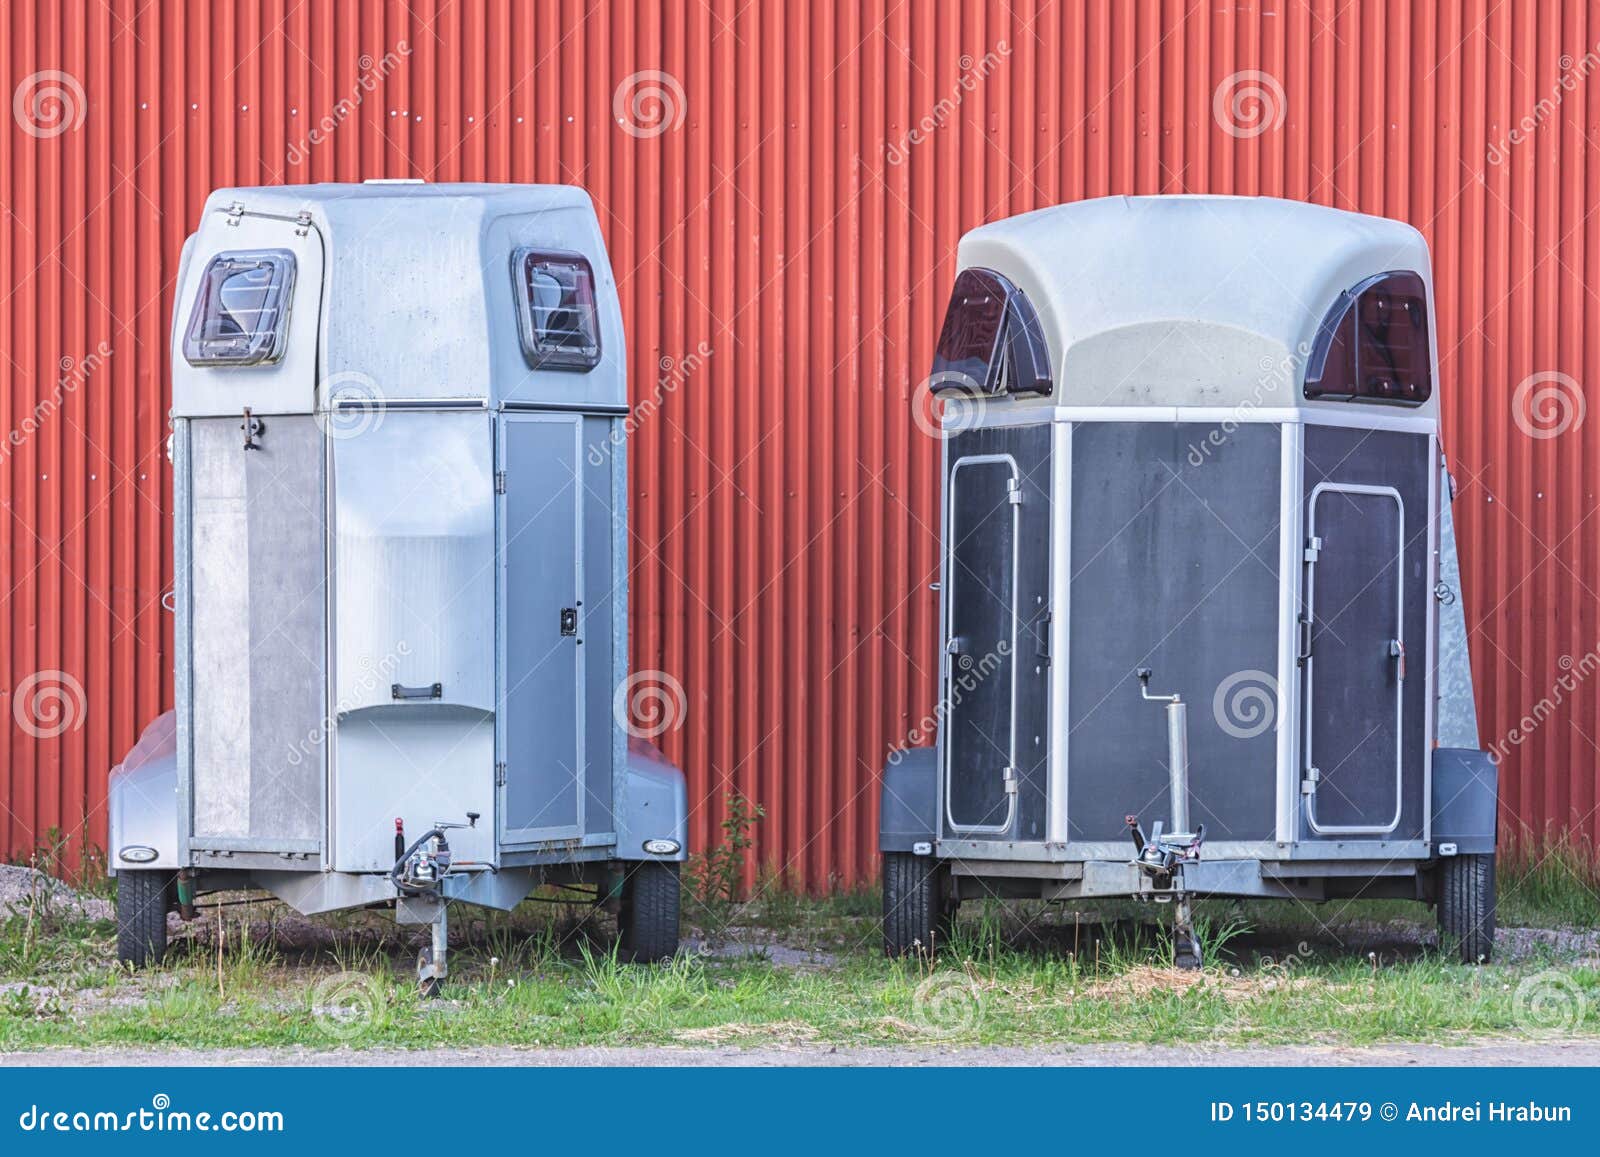 Several Horse Transportation Trailers Parked on the Grass Stock Image -  Image of enclosed, background: 150134479